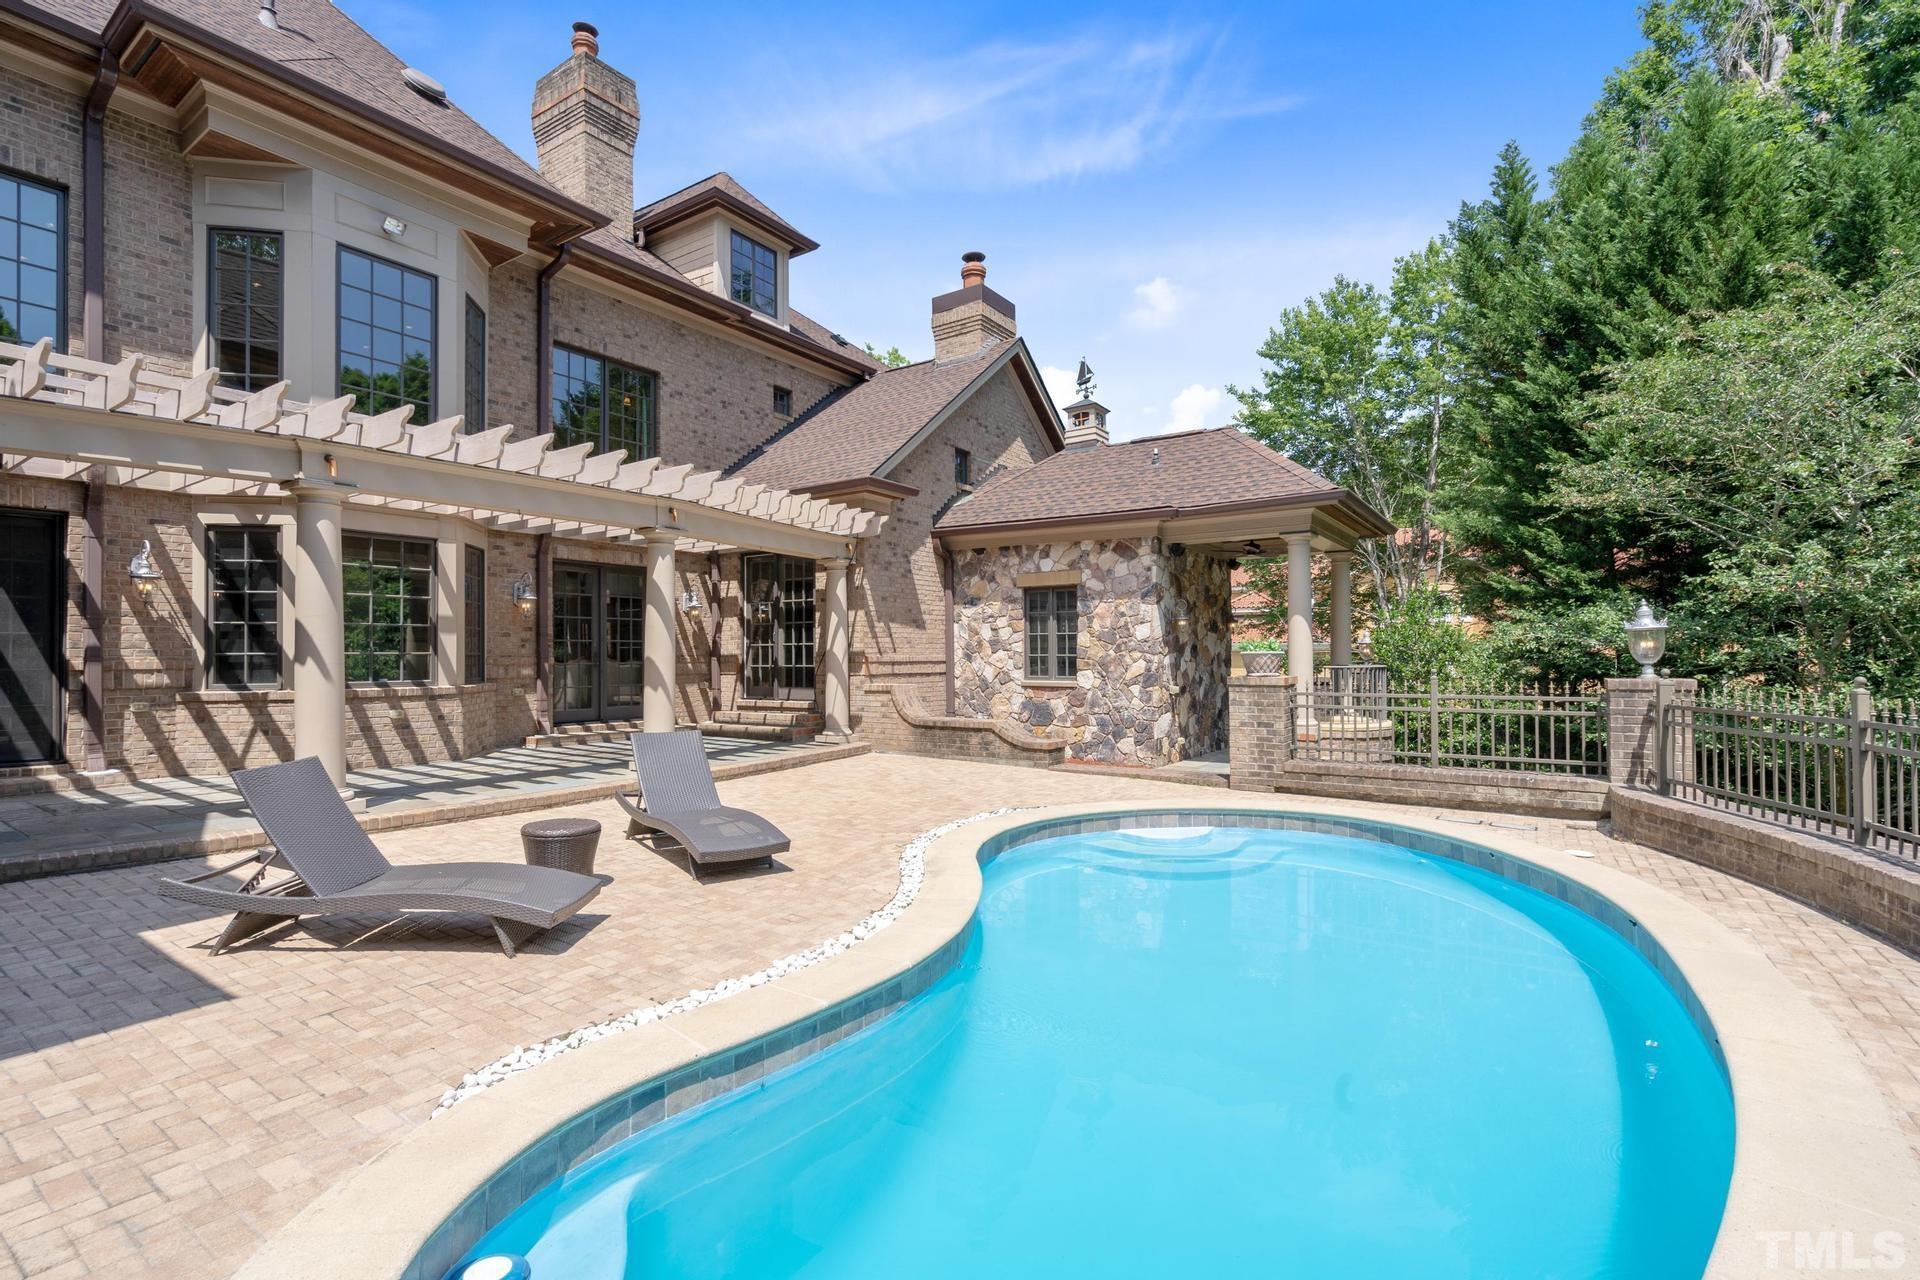 Plenty of sunning space on the bricked pool deck for your many summer pool parties & cookouts are easy with a gas line for the grill. Pool is heated & has lights. Notice the beautiful pergola that adorns the back patio and the fountain on the wall!